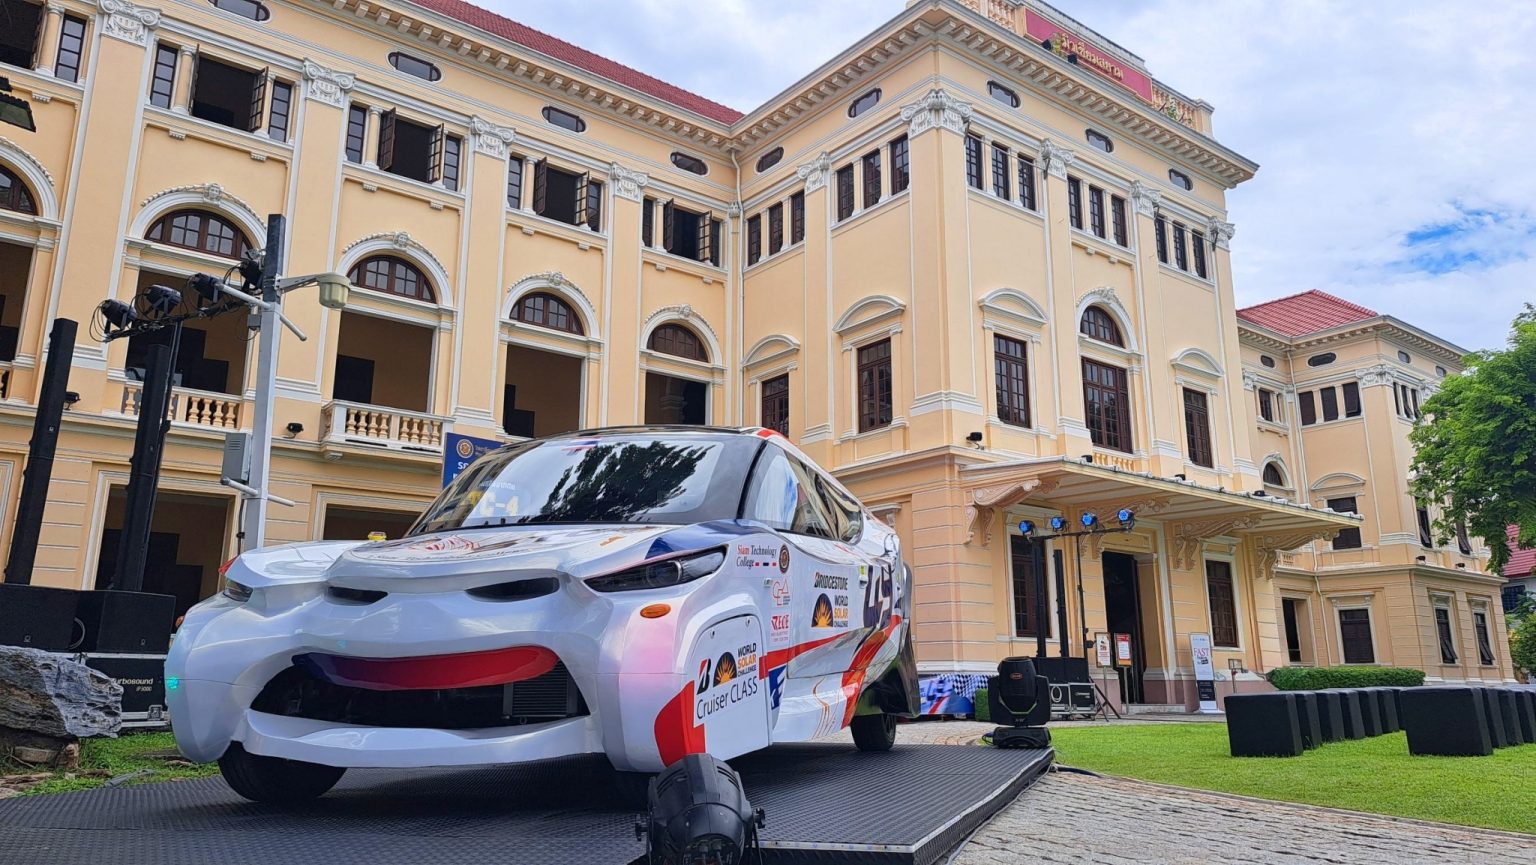 Thai-made STC-4 solar vehicle launched to join global race in Australia